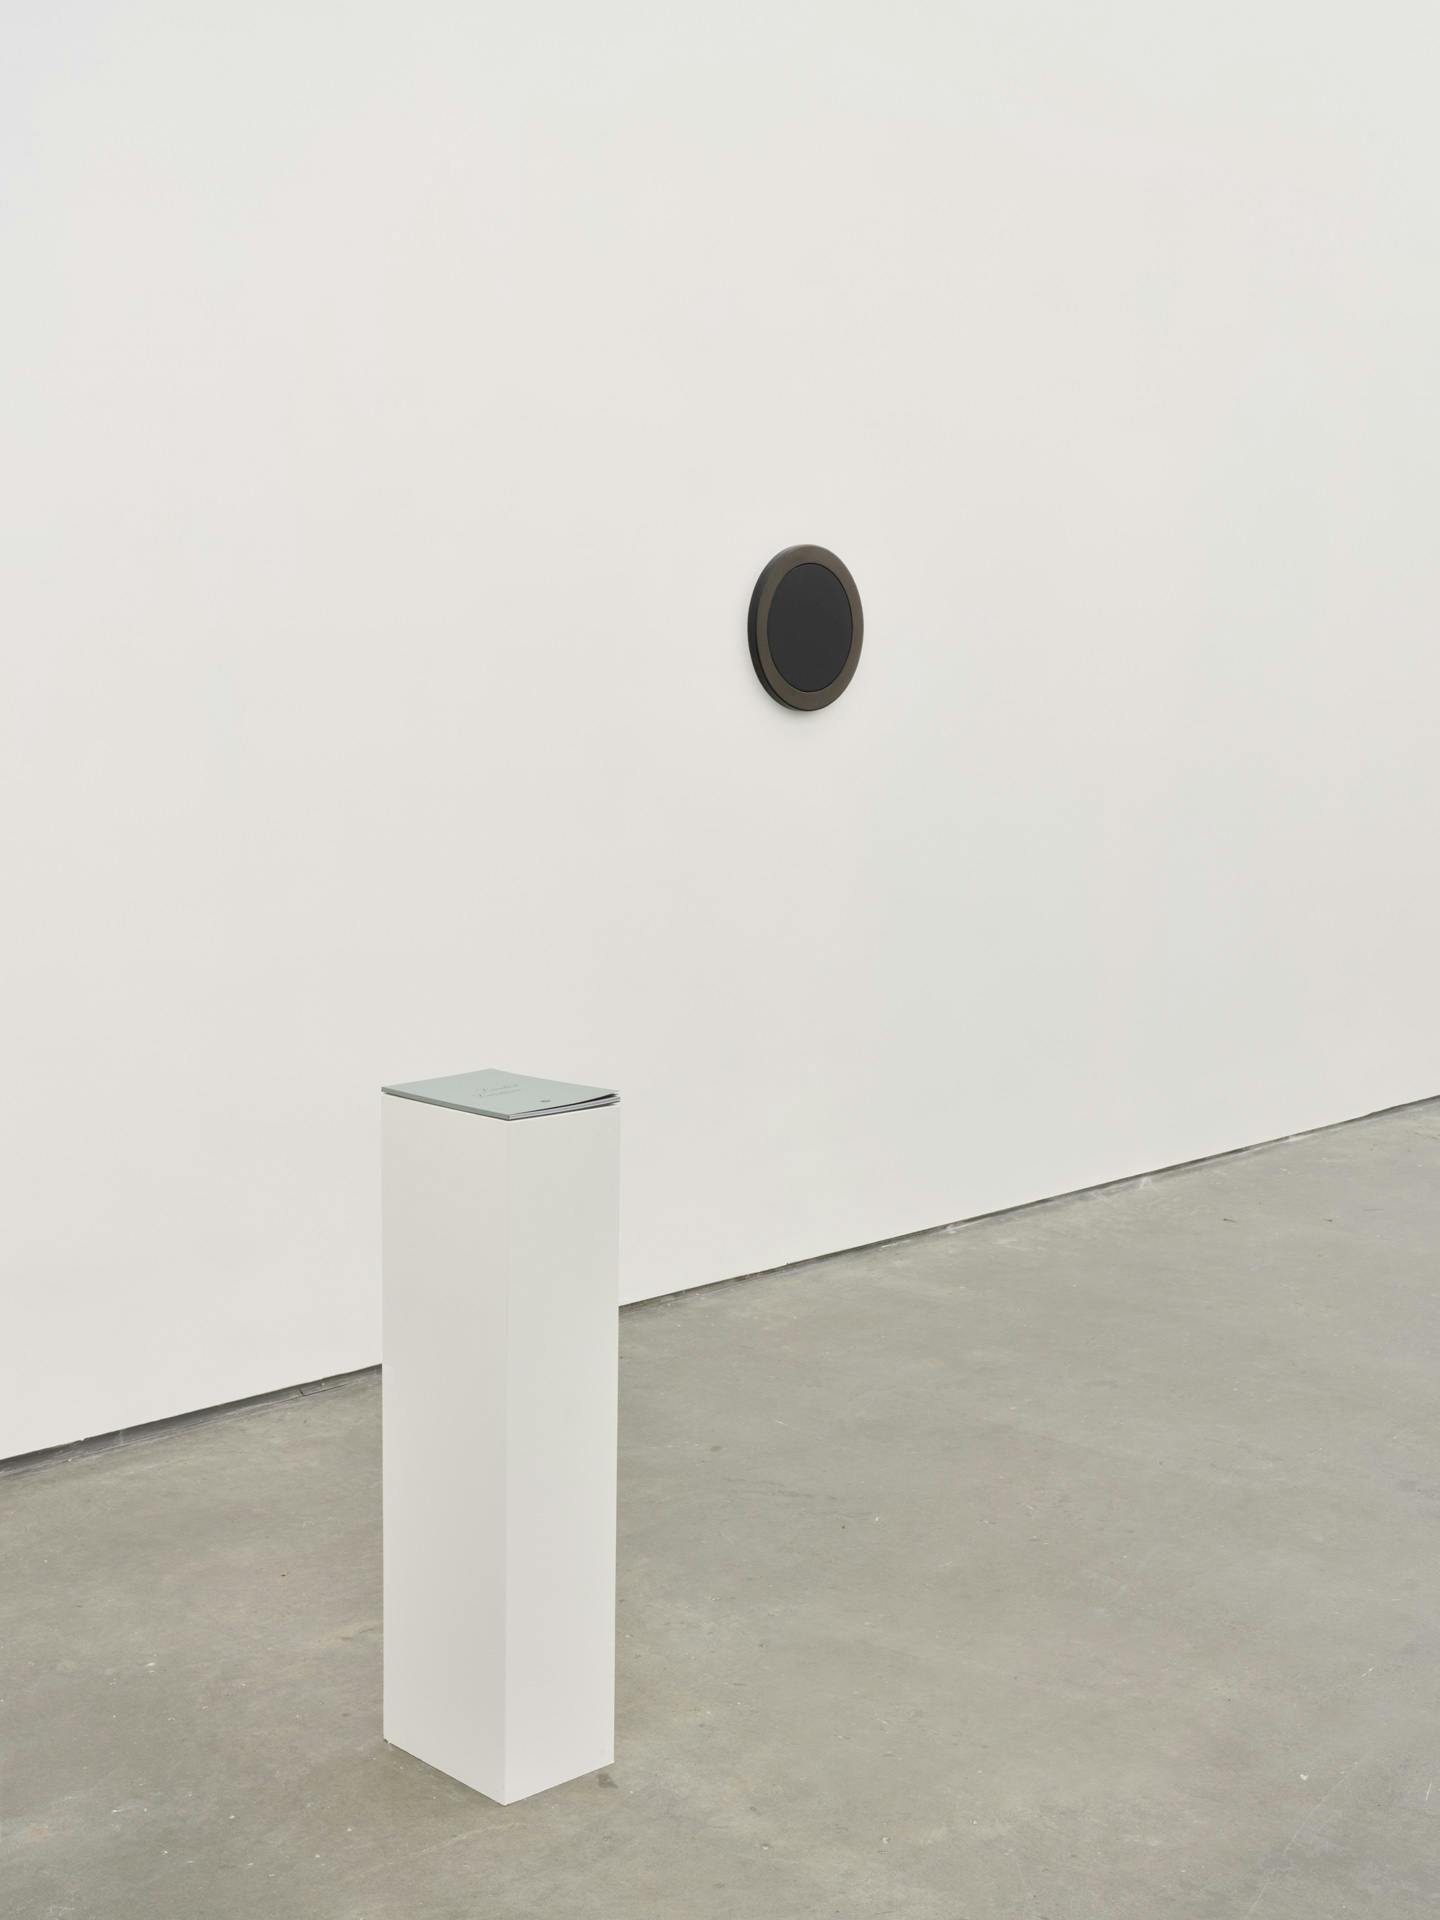 A thin artist book by Kathy Slade lying closed on a white plinth, in front of a white wall with a small, black framed mirror slightly to the right of the plinth.